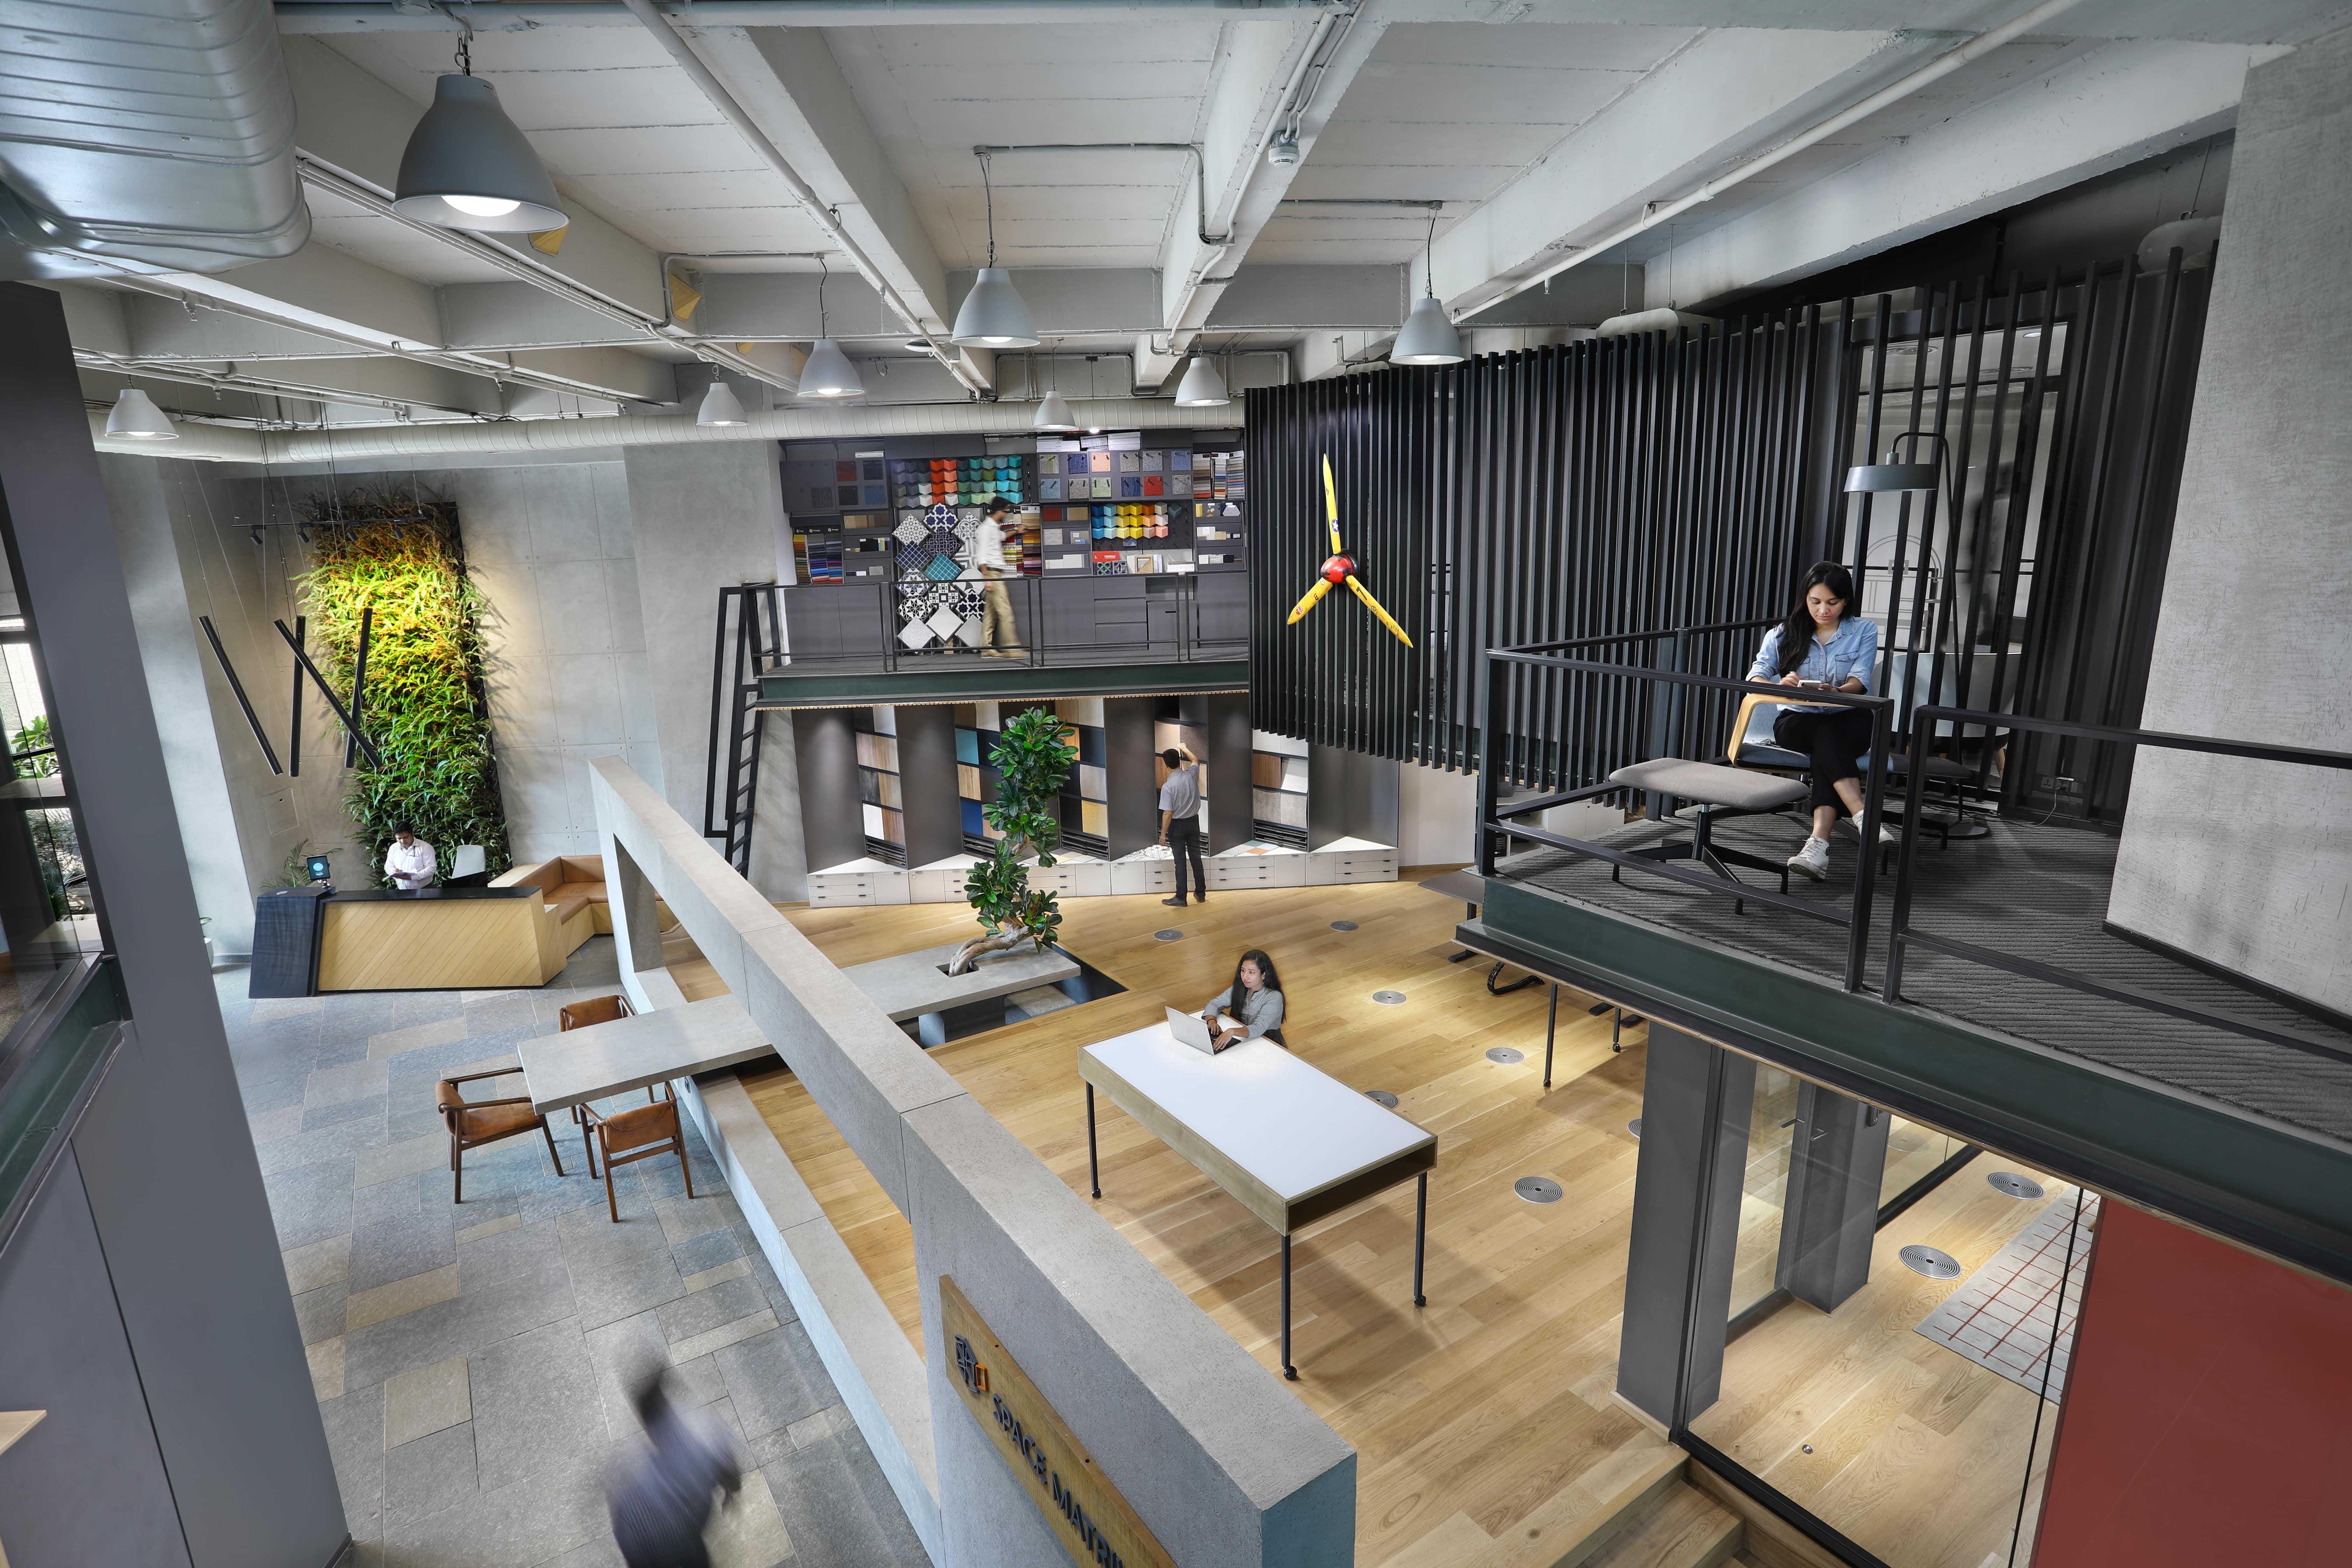 Space Matrix Beta Lab enables collaboration for the hybrid workforce